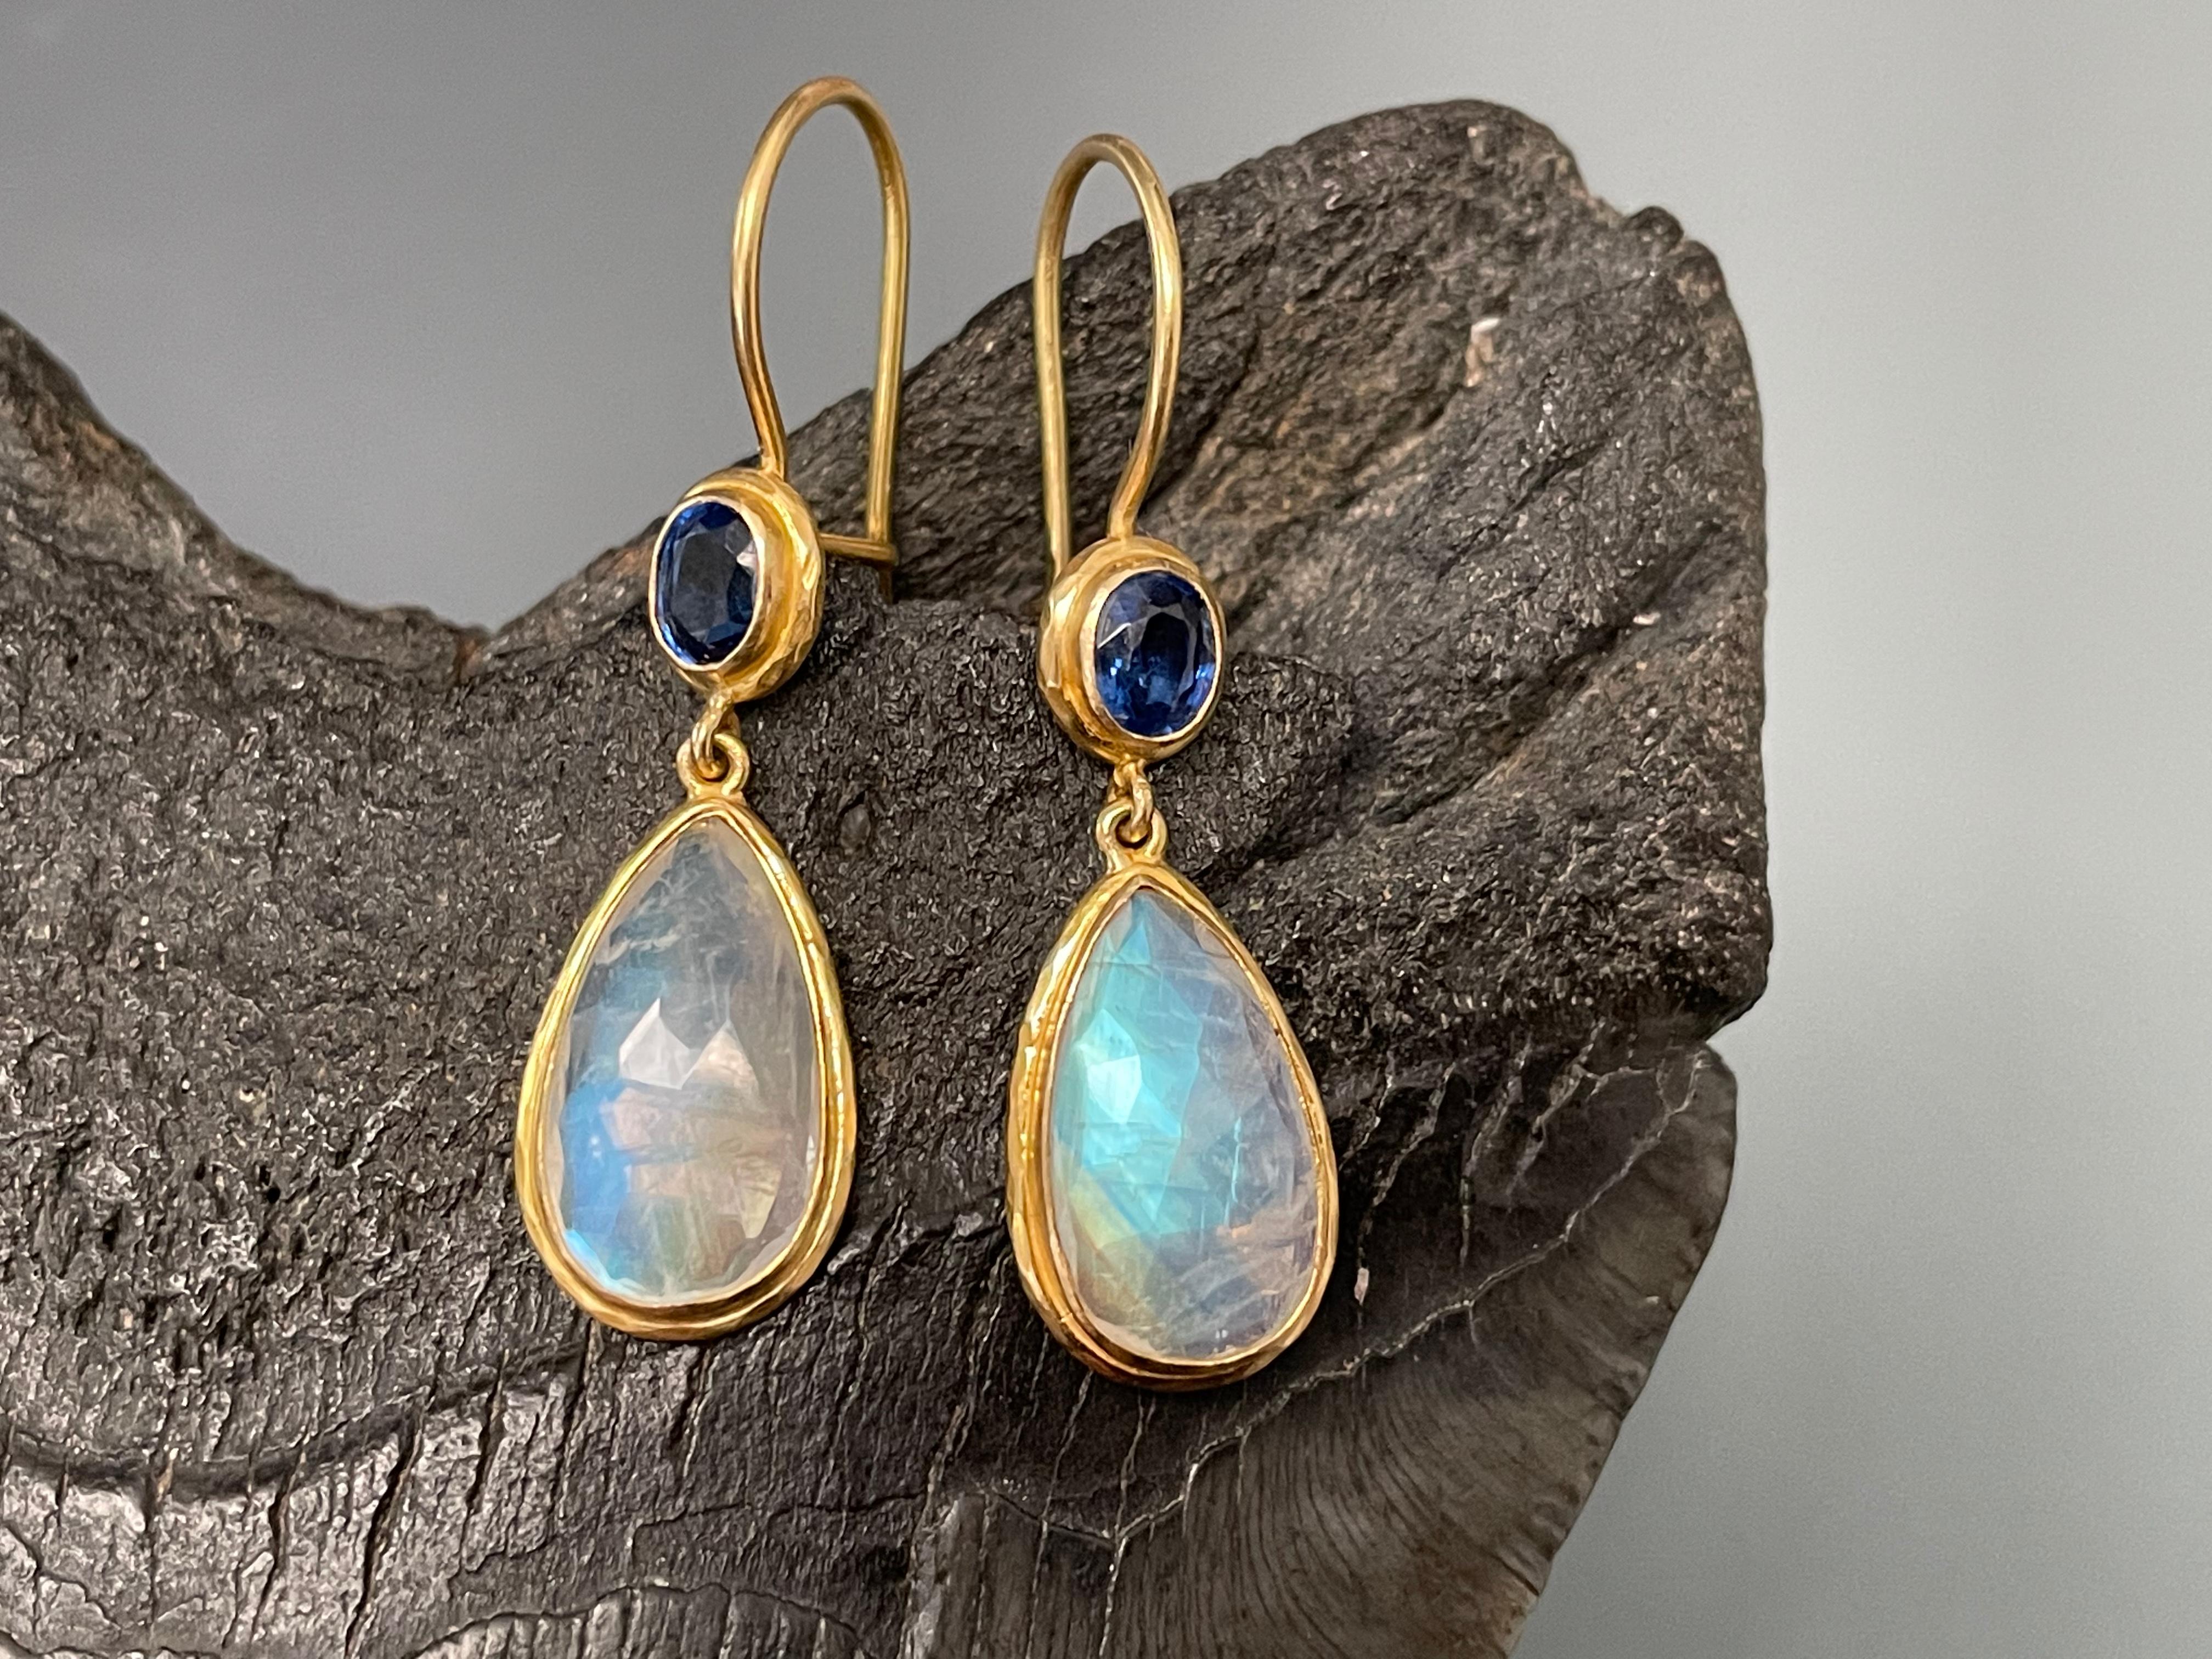 Handset 6 Carats of rose cut rainbow moonstone 8 x14 mm elegant pear shaped stones dangle below safety clasp earwires with 3x5mm faceted Kyanite ovals at the bottom.
Set into hammered matt-finish bezels.  Beautiful complementary colors !